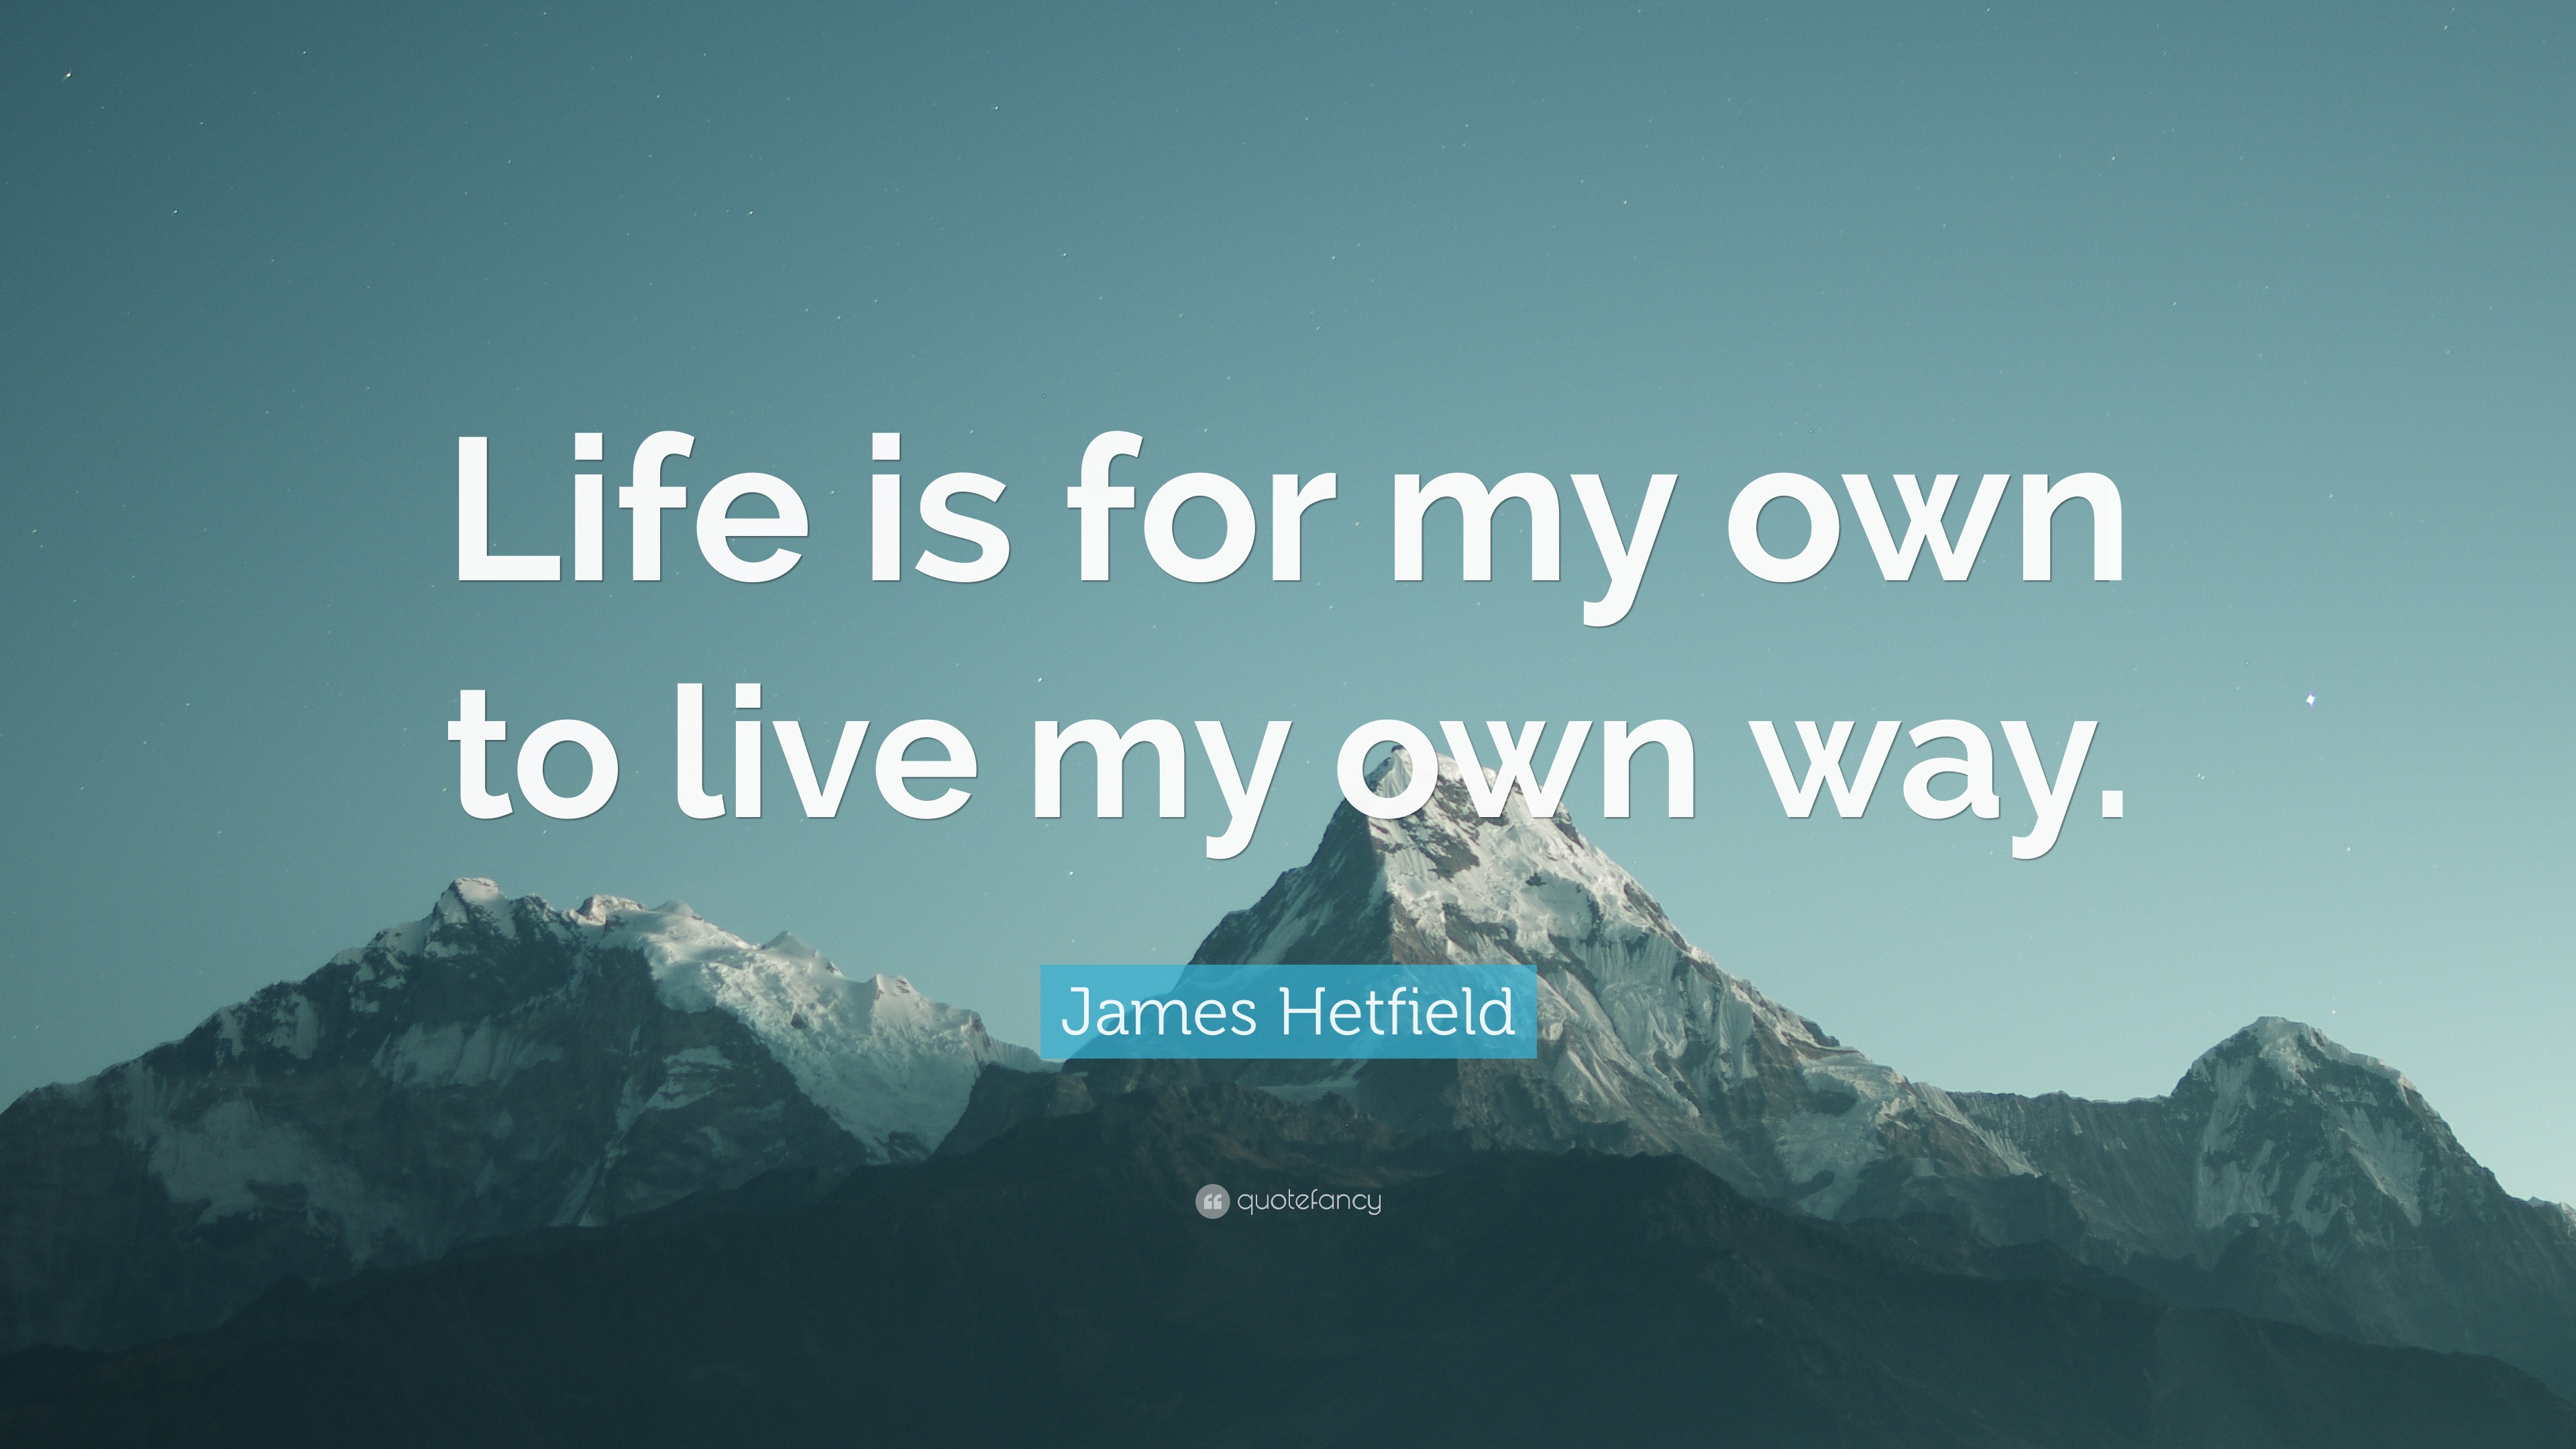 James Hetfield Quote “Life is for my own to live my own